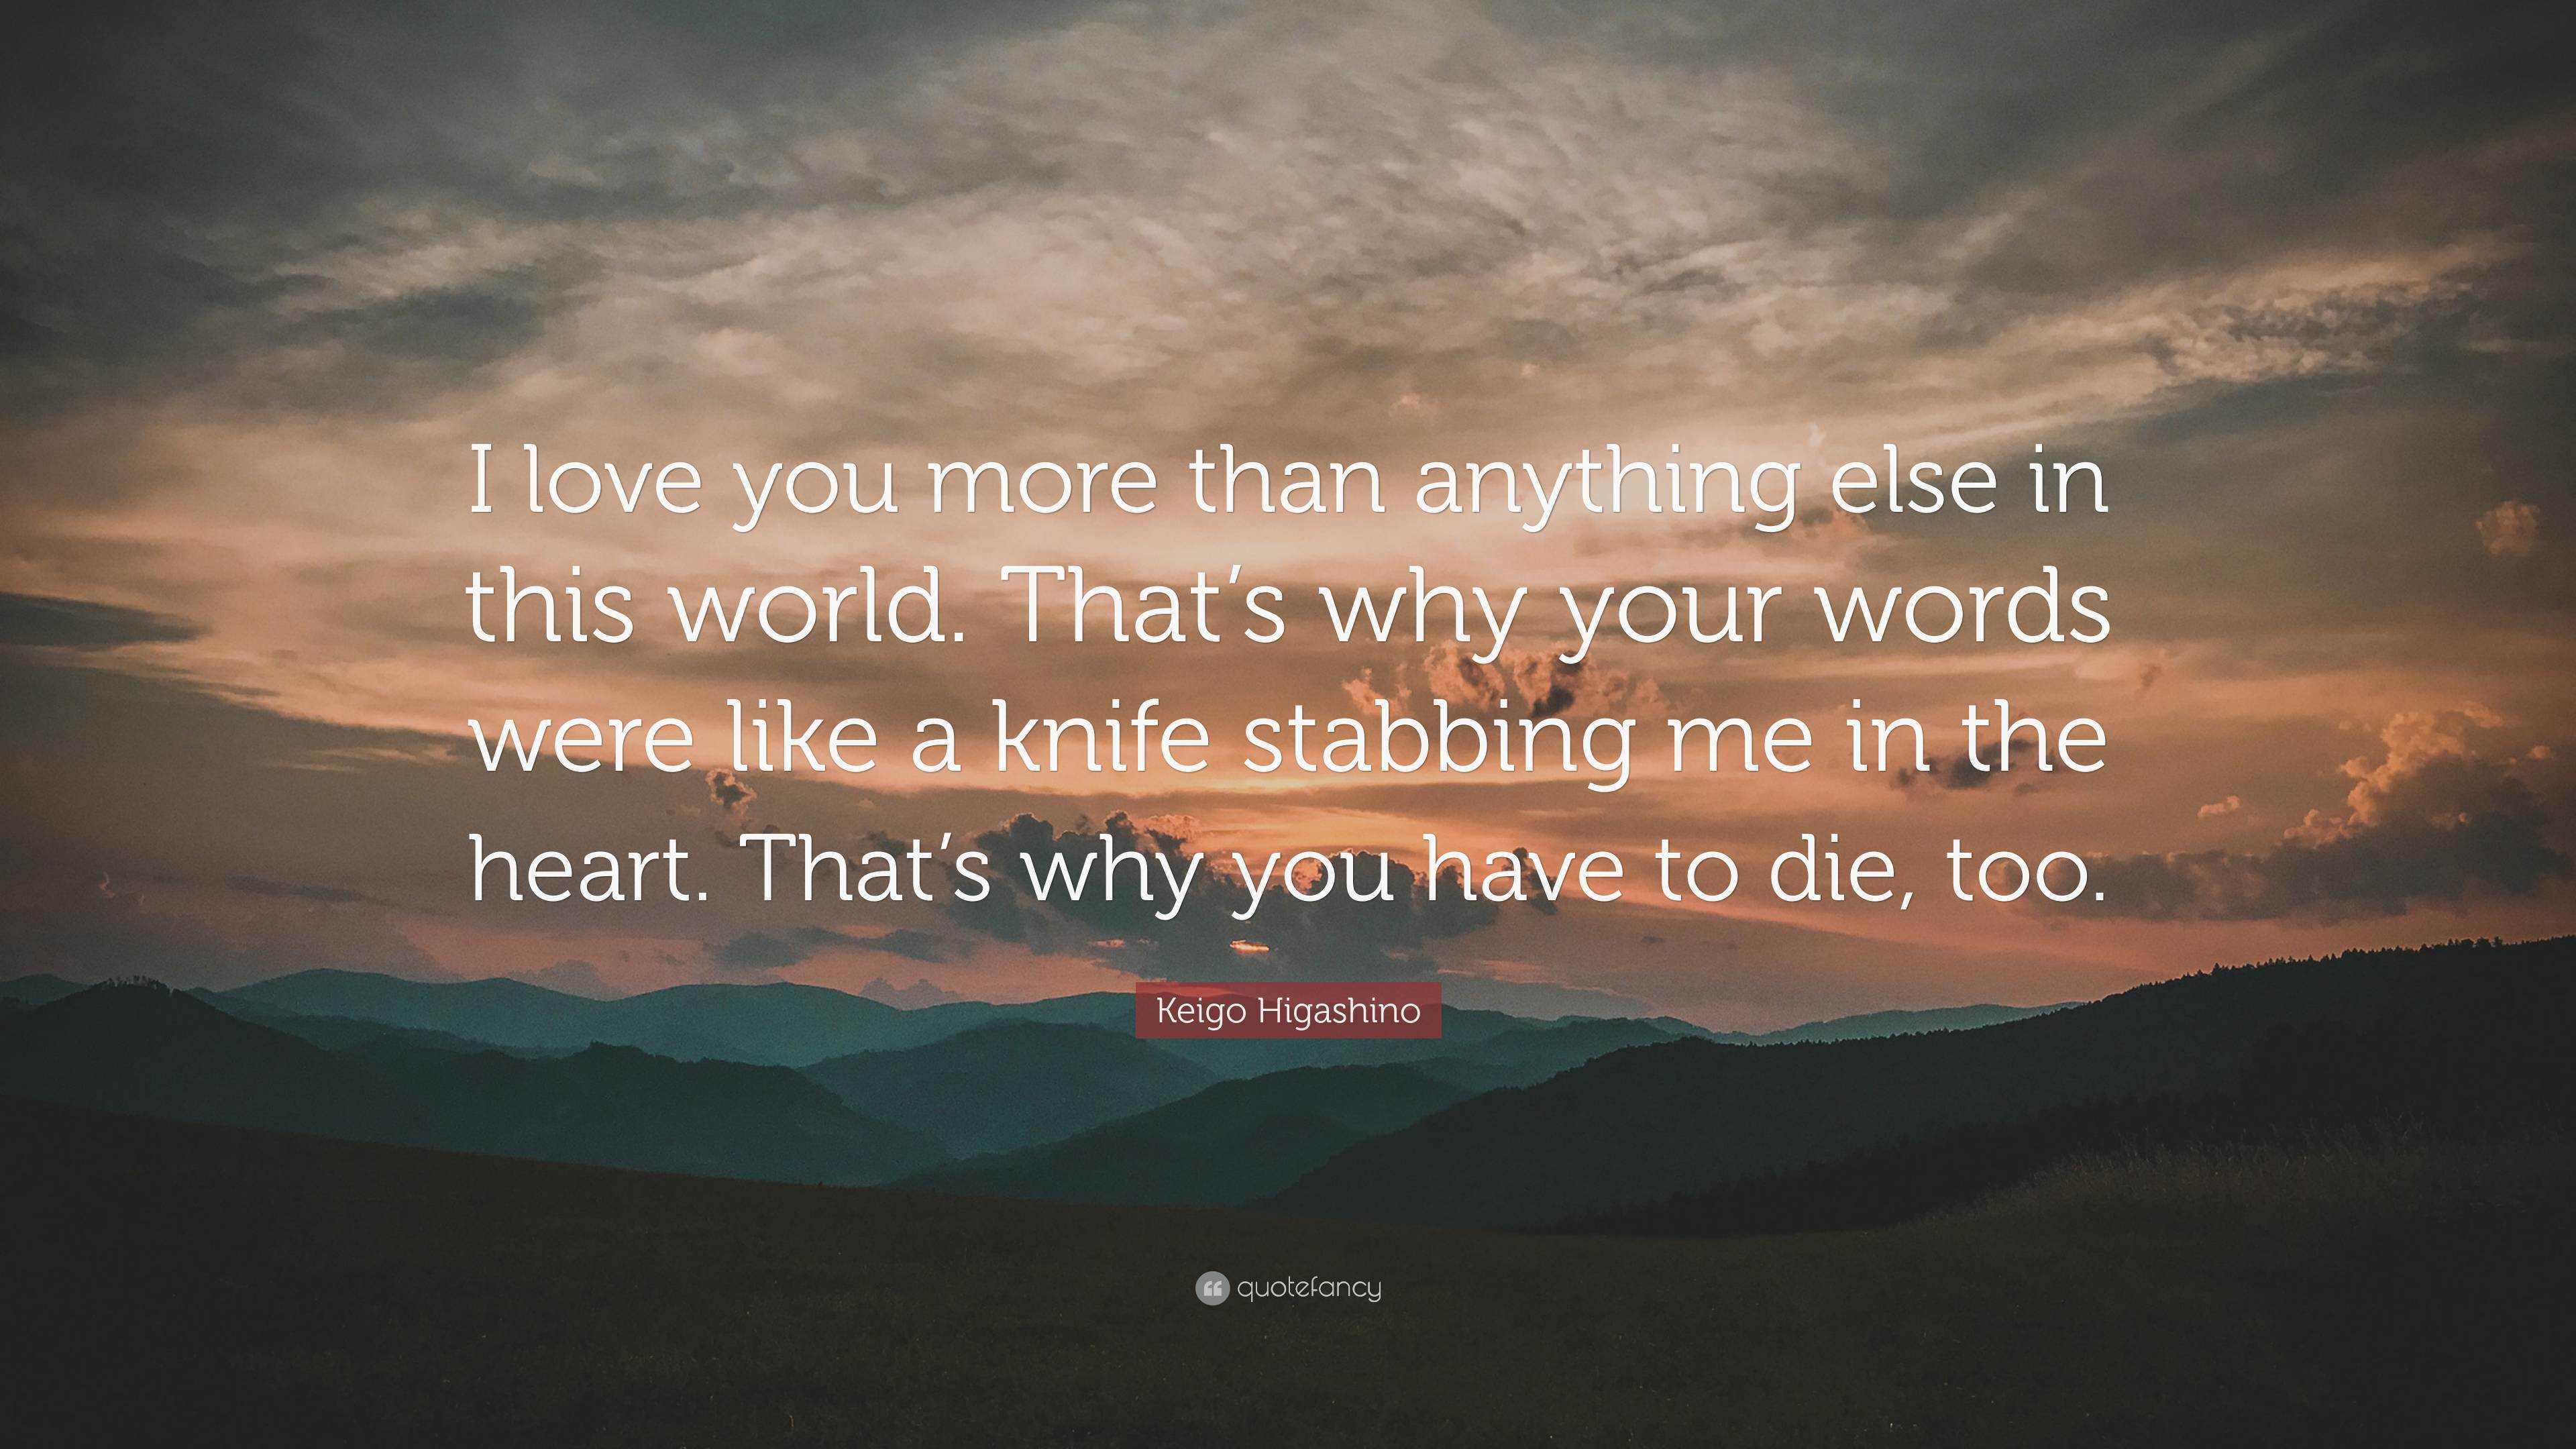 Keigo Higashino Quote I Love You More Than Anything Else In This World That S Why Your Words Were Like A Knife Stabbing Me In The Heart That